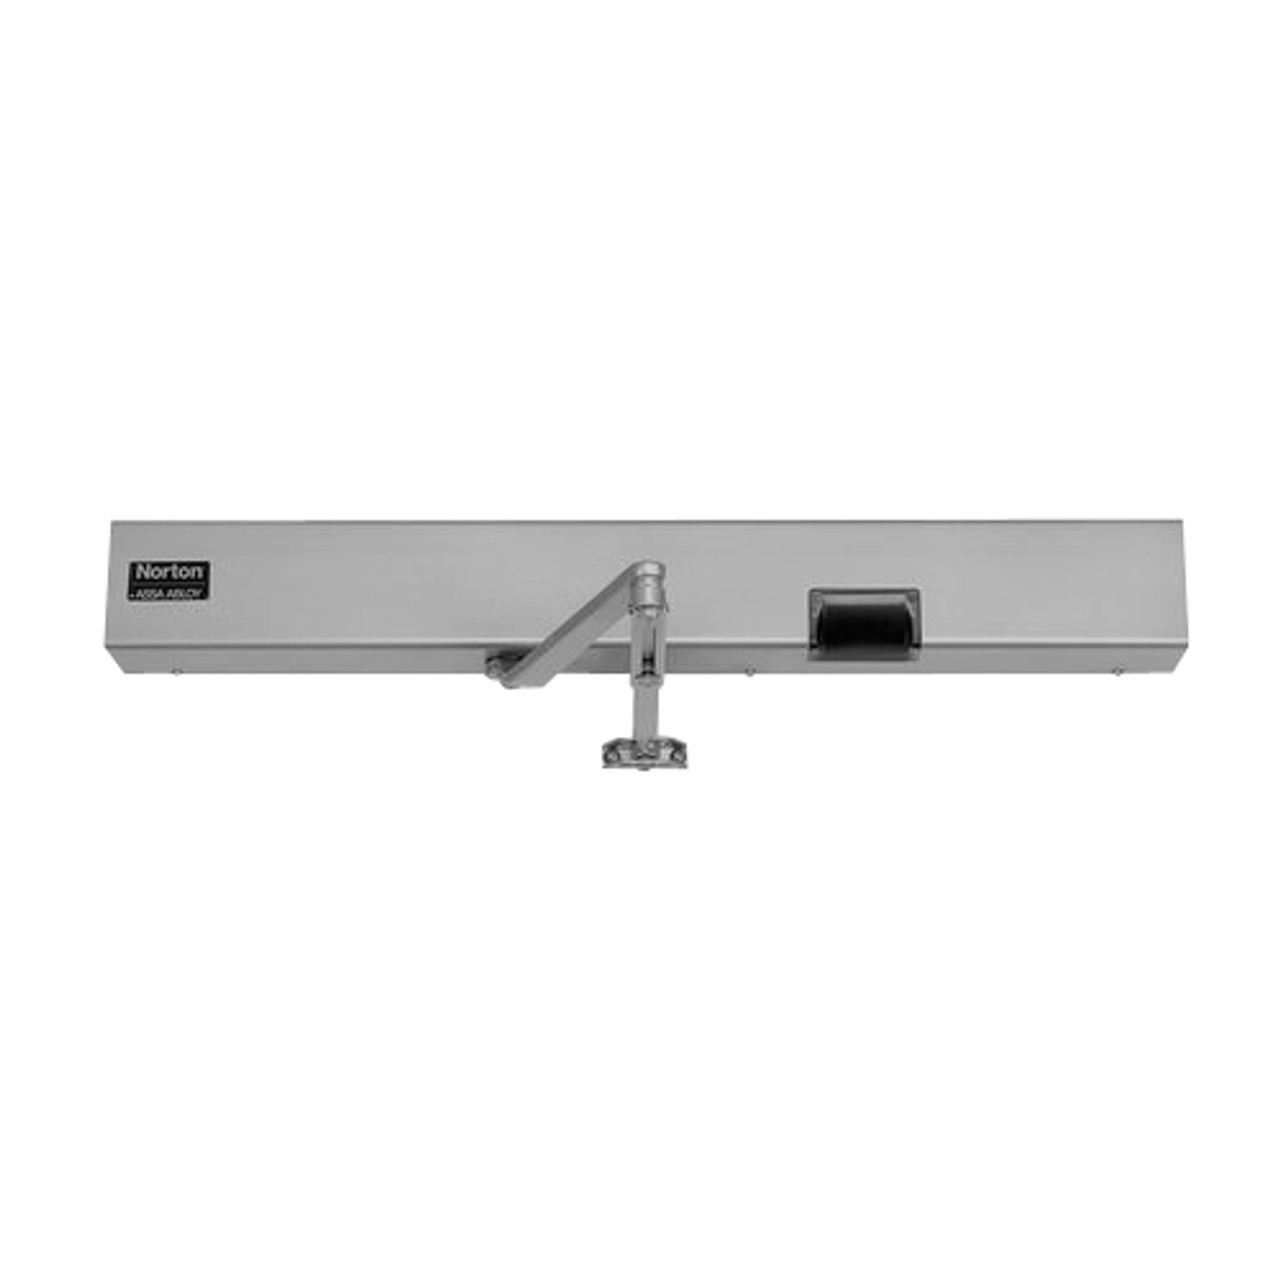 7132SZ-LH-24VDC-689 Norton 7100SZ Series Safe Zone Multi-Point Closer/Holder with Motion Sensor and Push Side Double Lever 13-1/2 inch Main Arm in Aluminum Finish